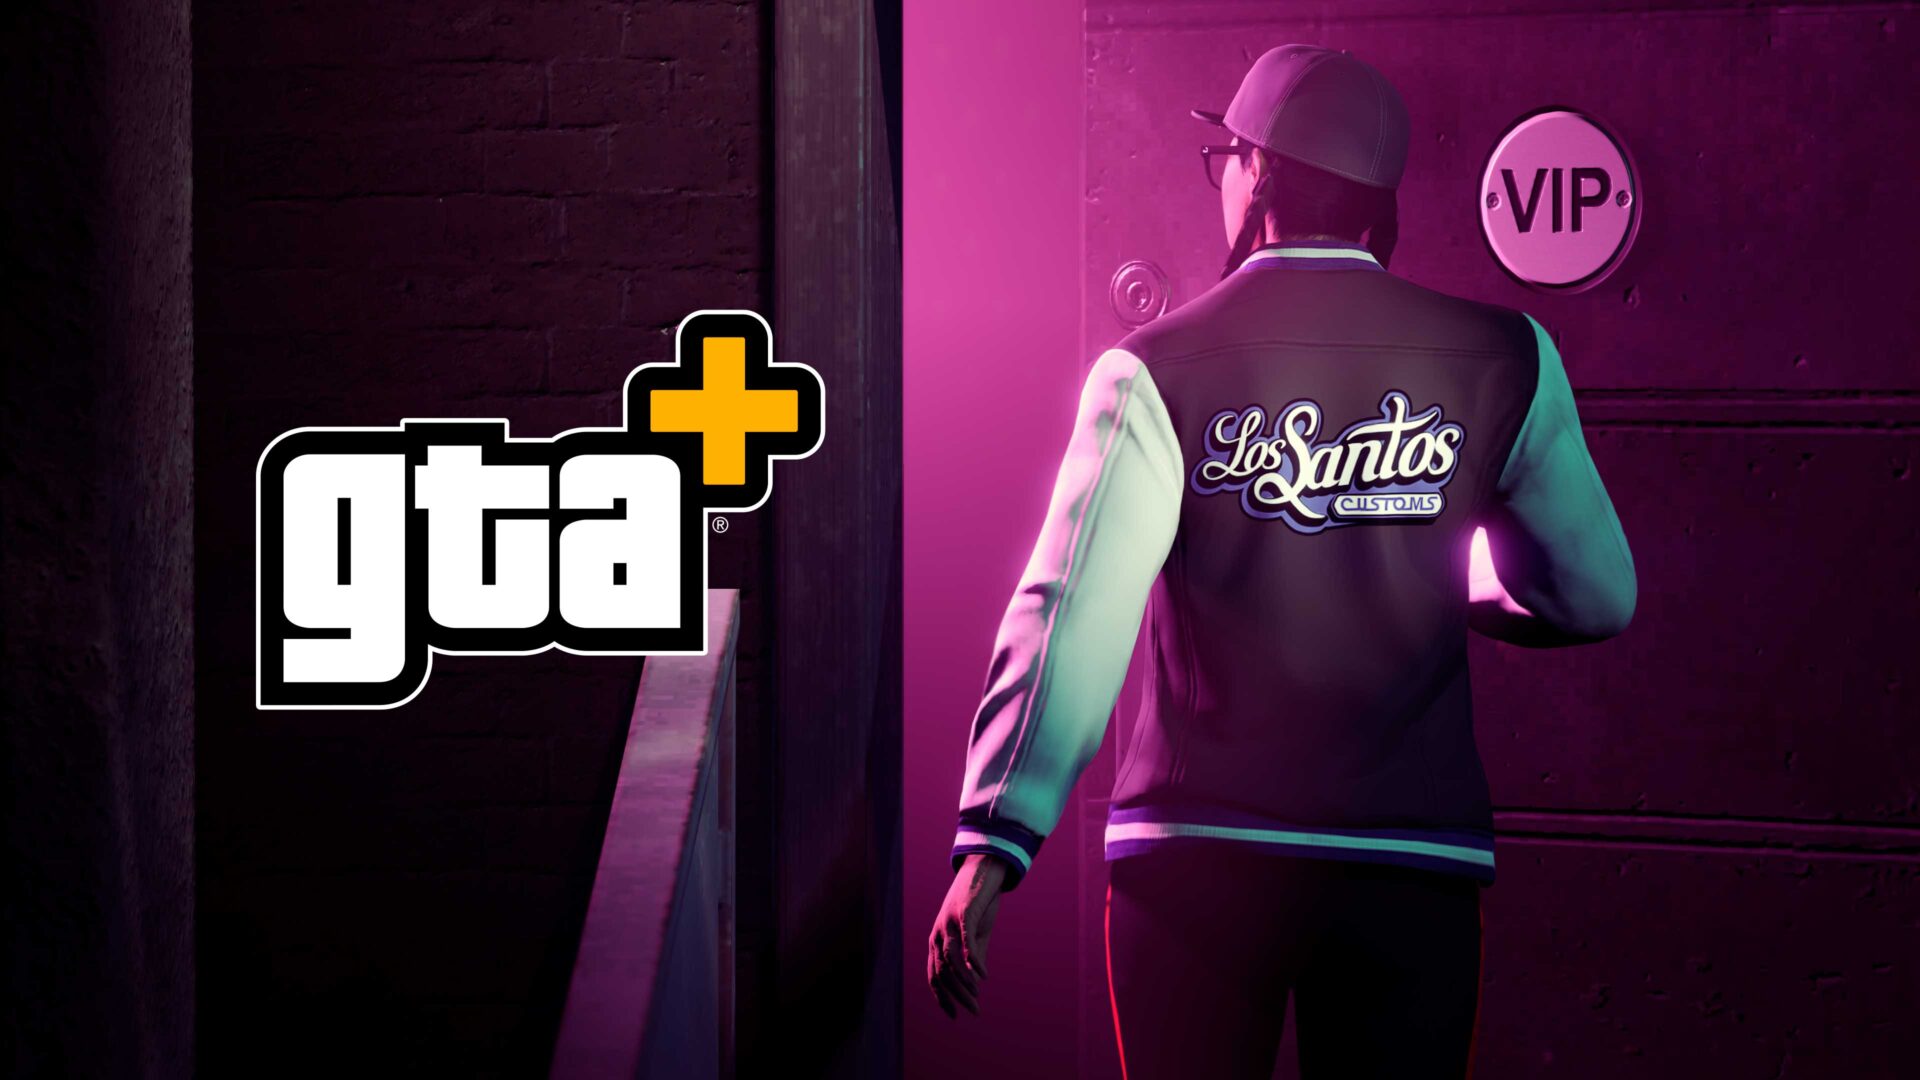 Rockstar Games announced its new paid subscription system under the name GTA +